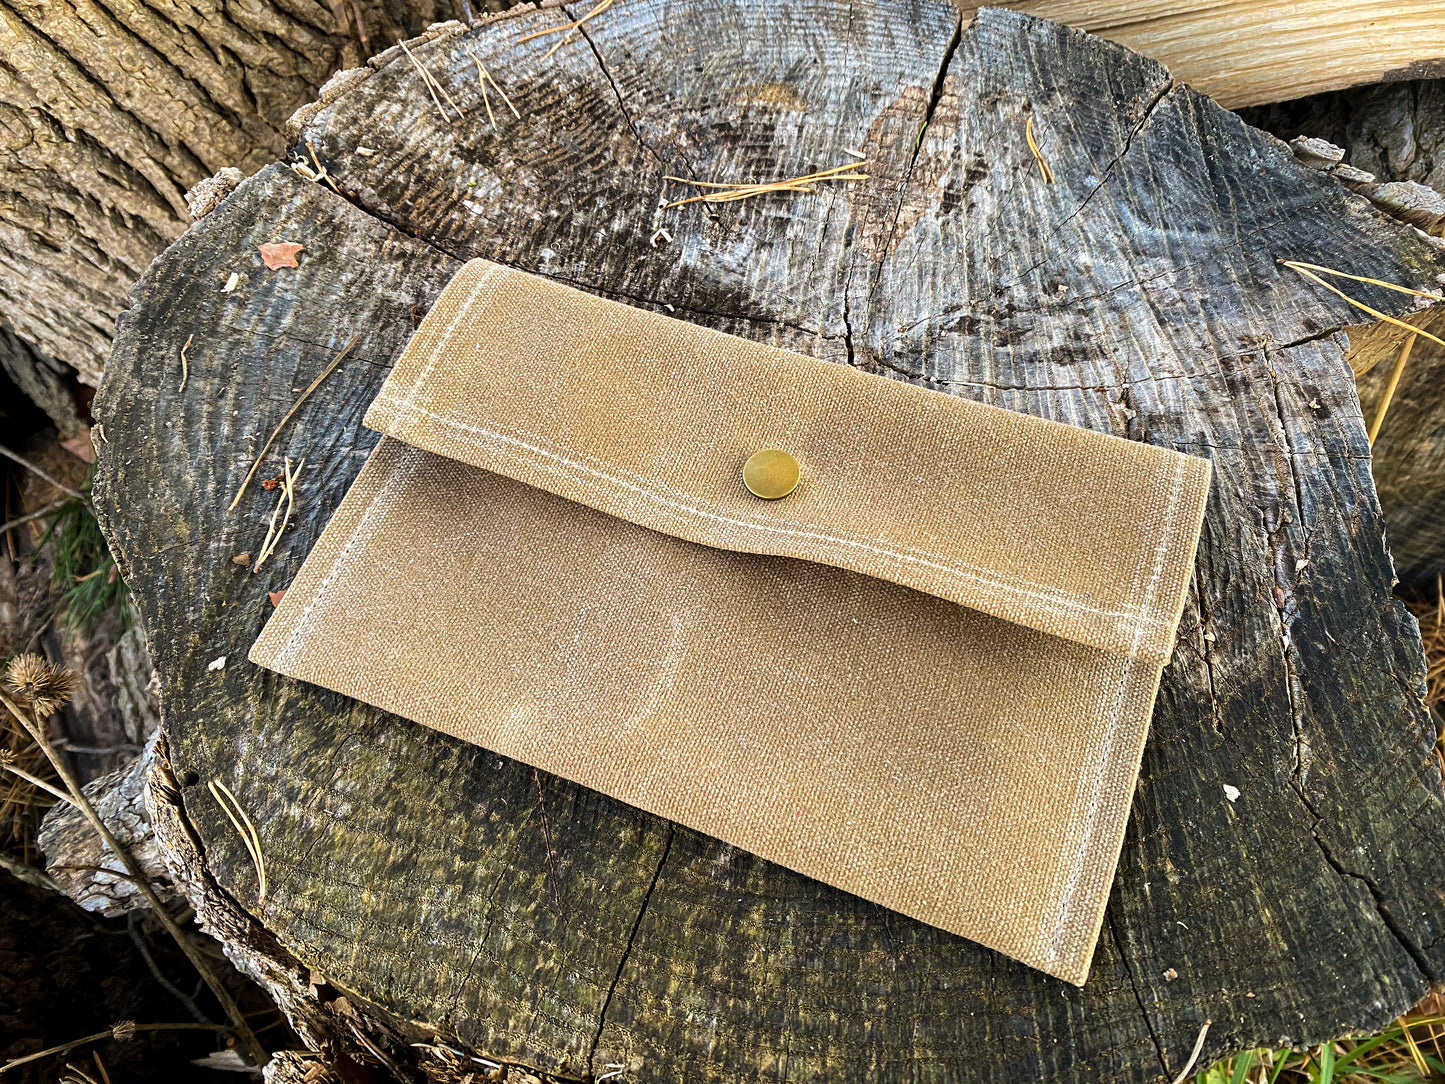 Waxed Canvas Pipe Pouch